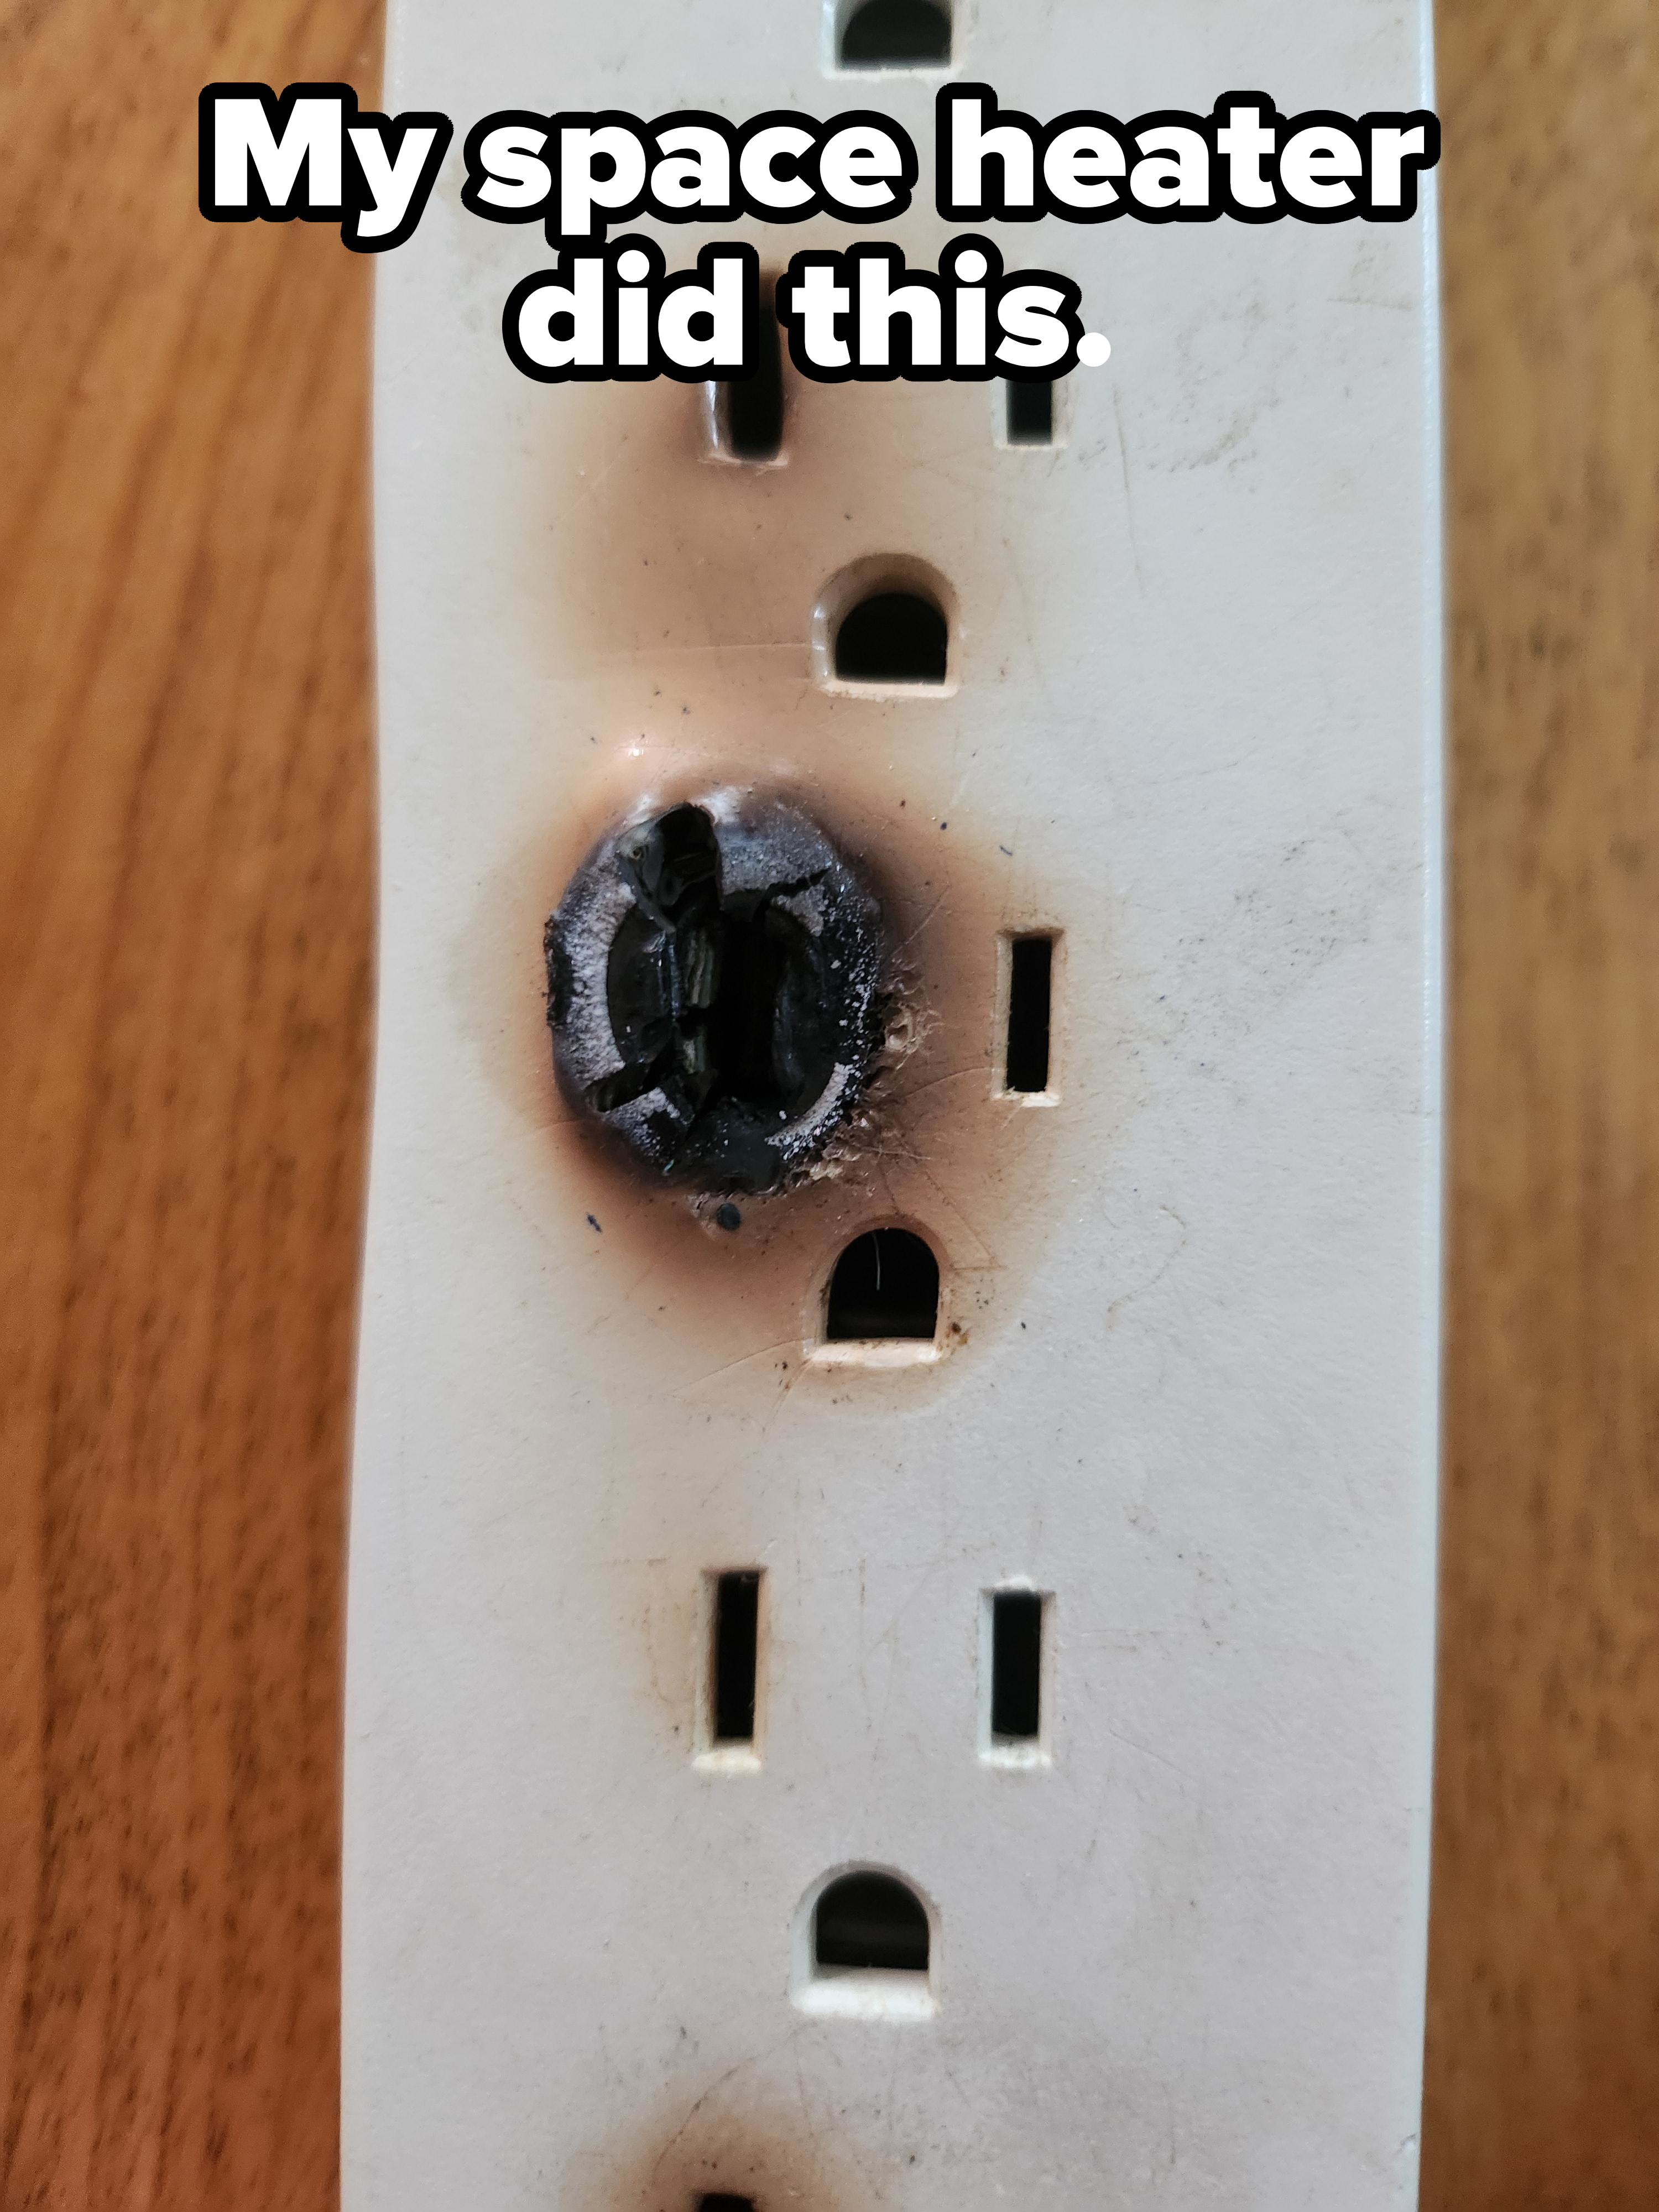 &quot;My space heater did this&quot;: showing a burned-out outlet